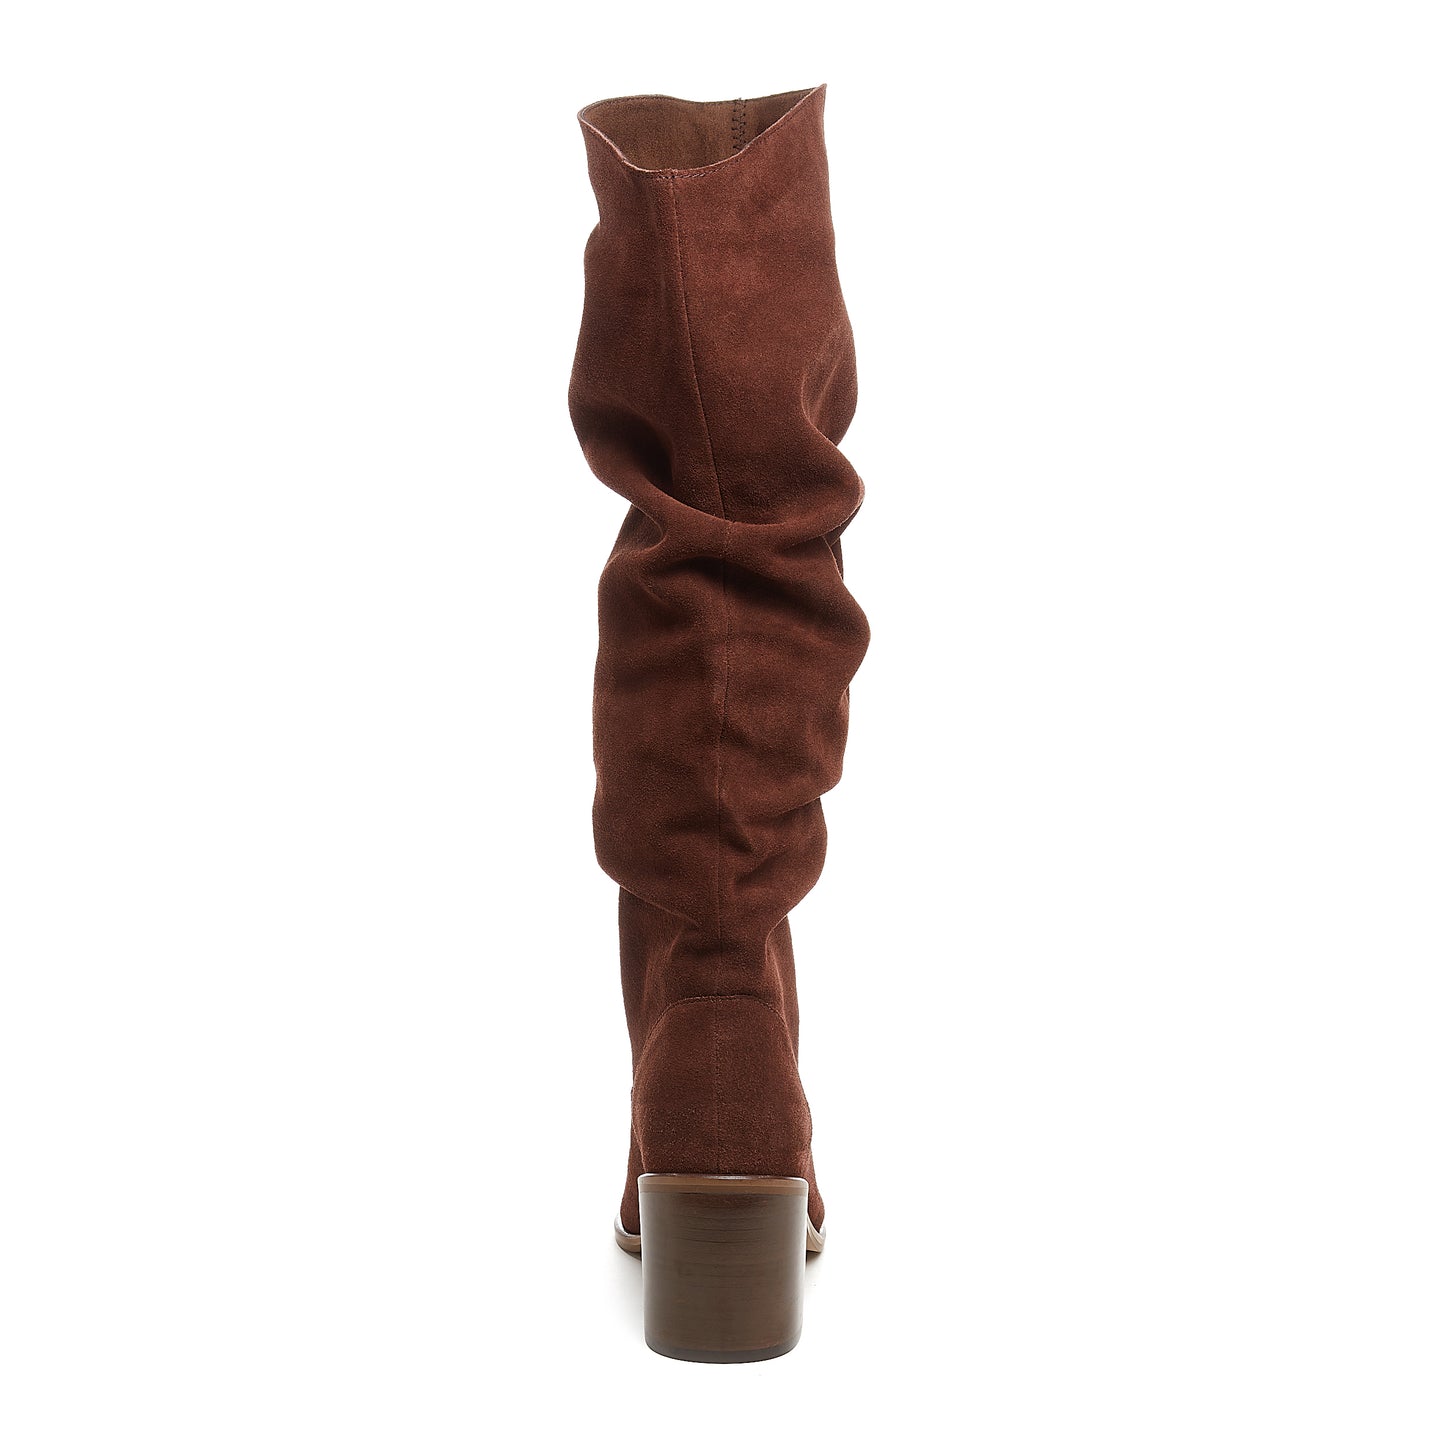 Easton Brown Suede Slouchy Boots